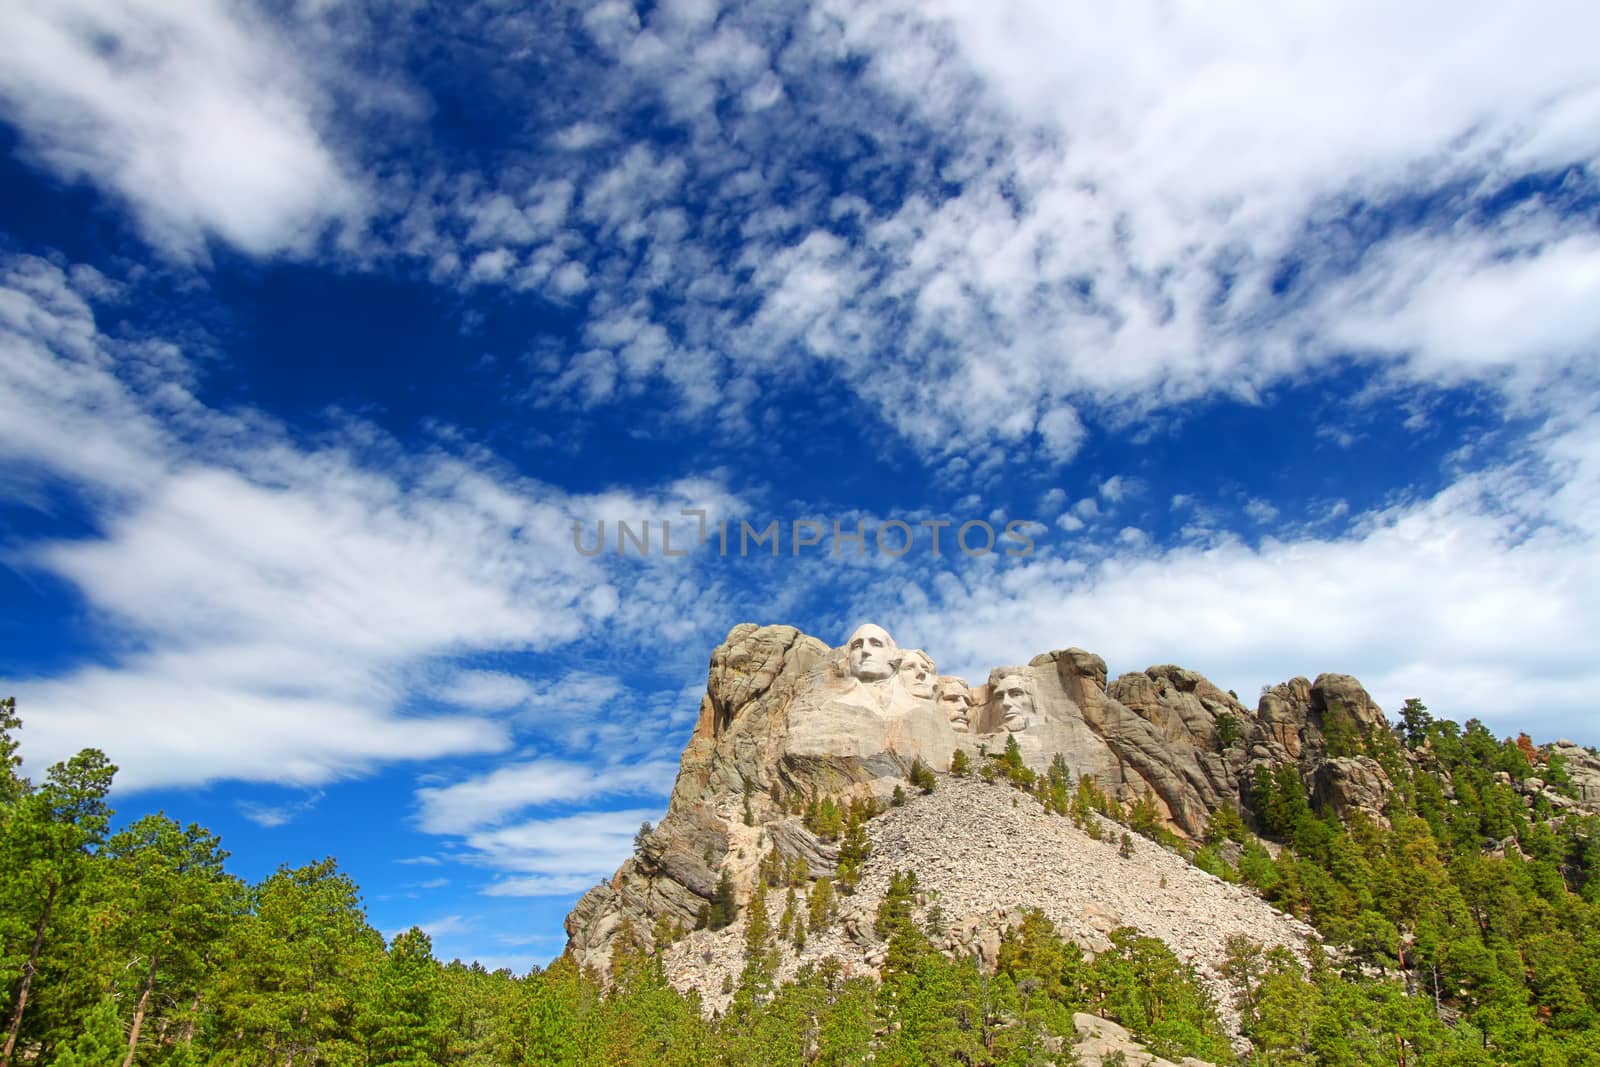 Mount Rushmore National Memorial by Wirepec